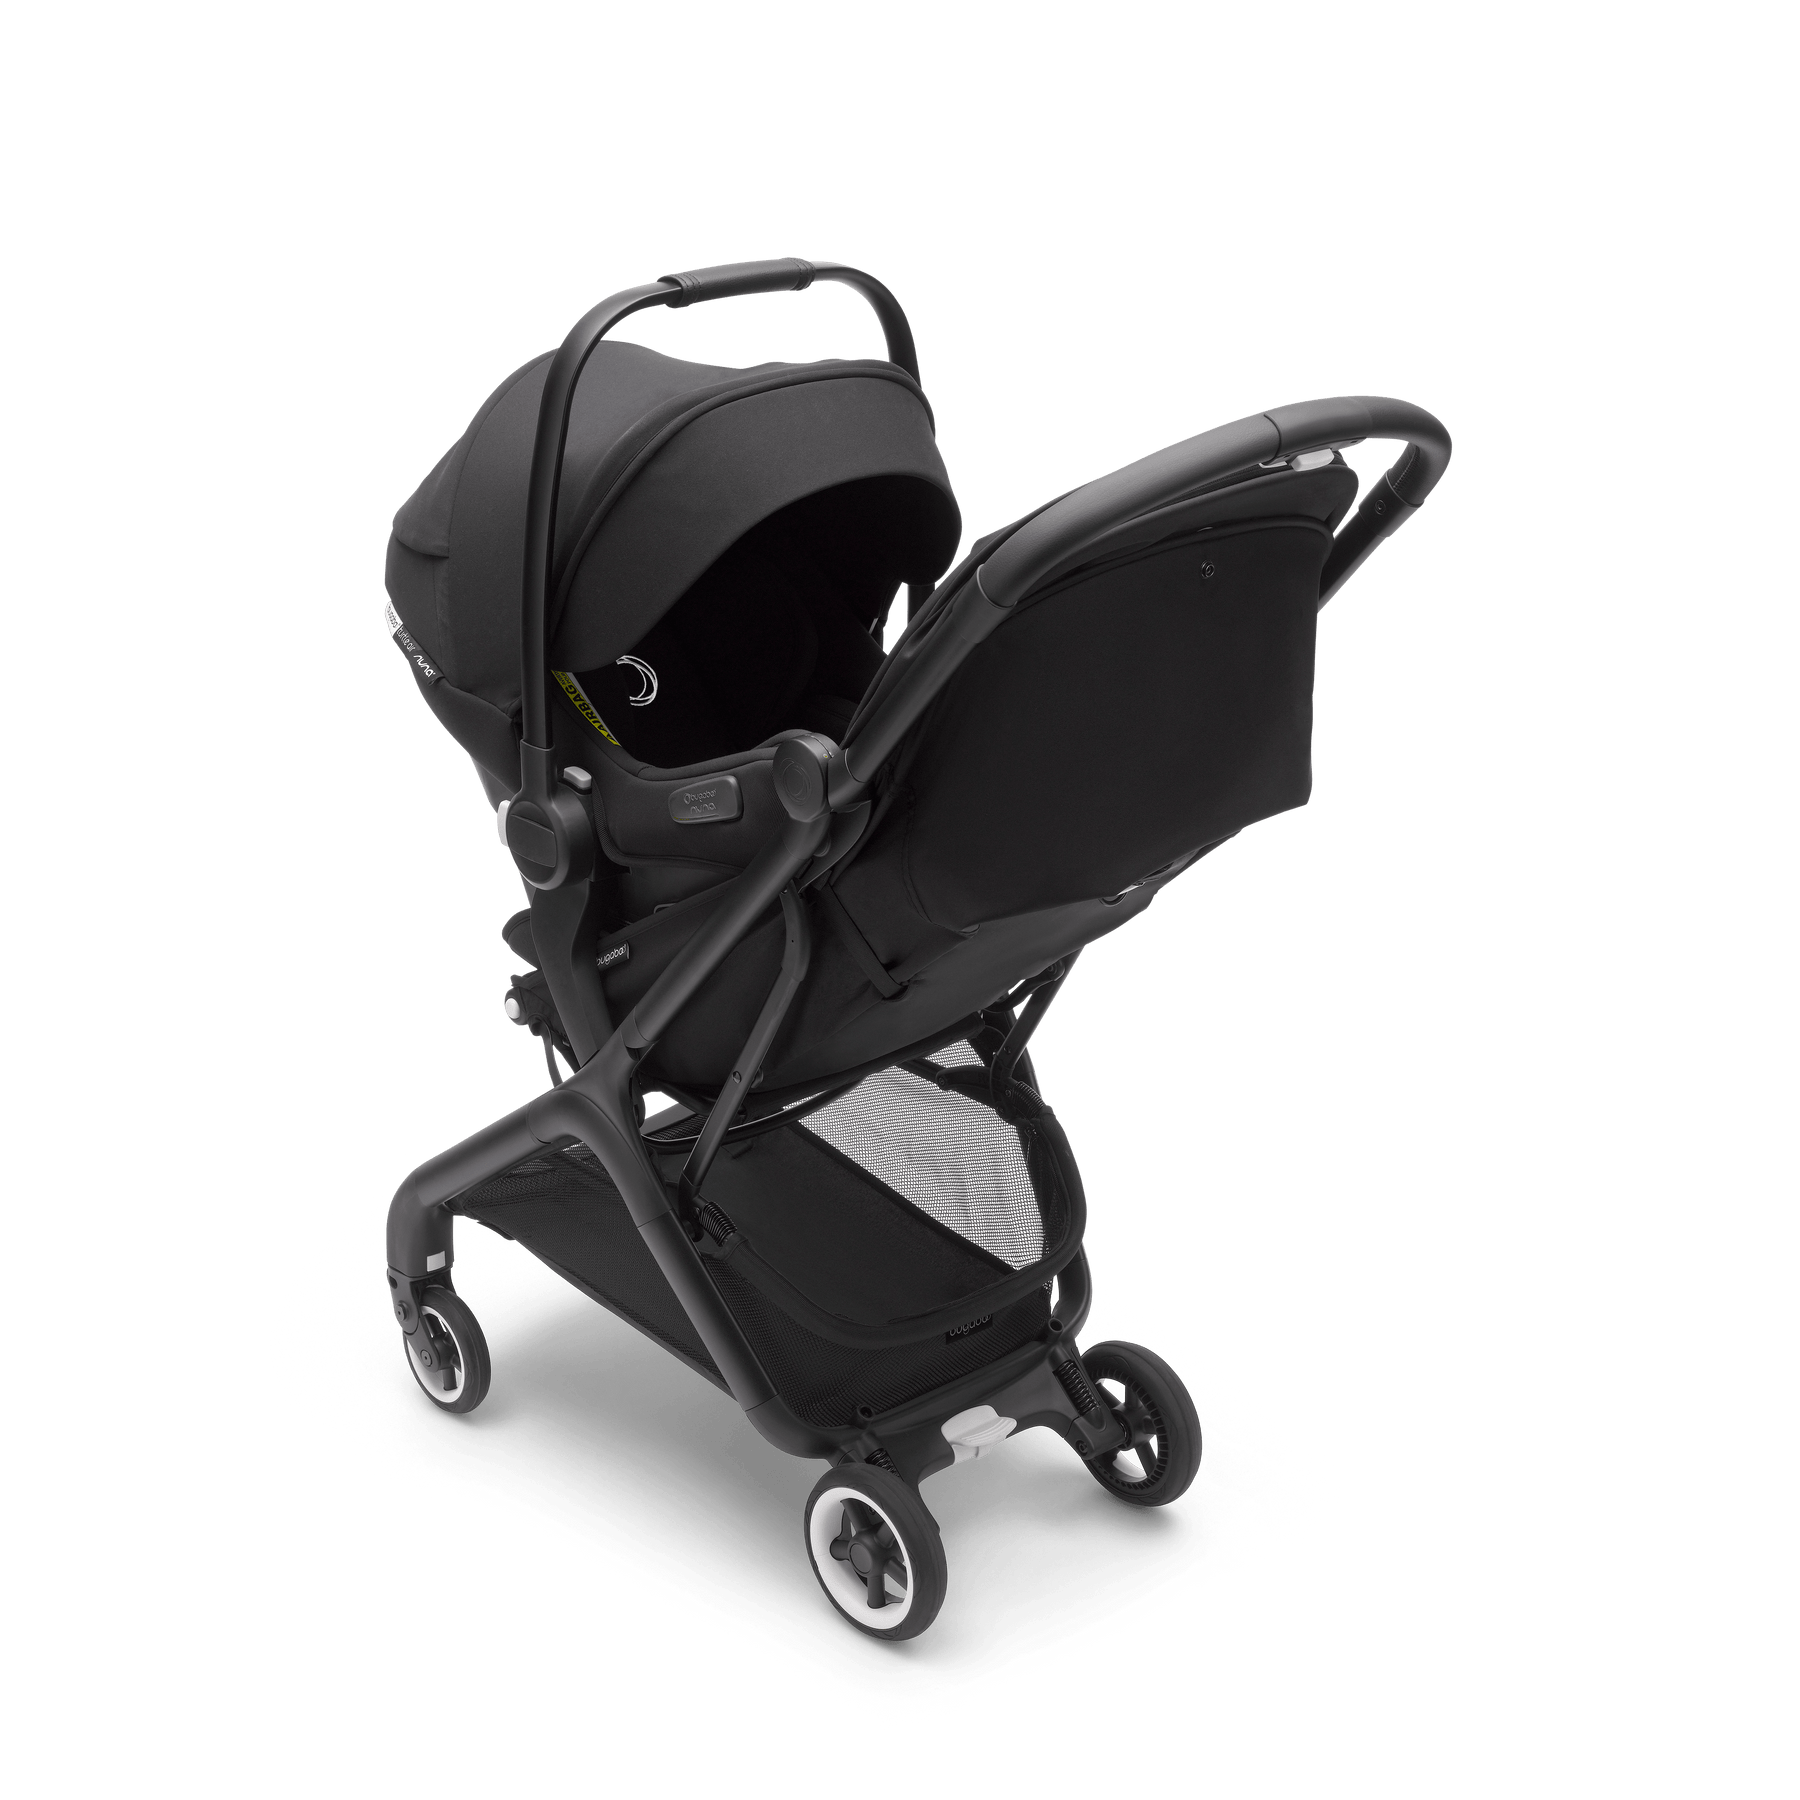 Introducing the Bugaboo Butterfly